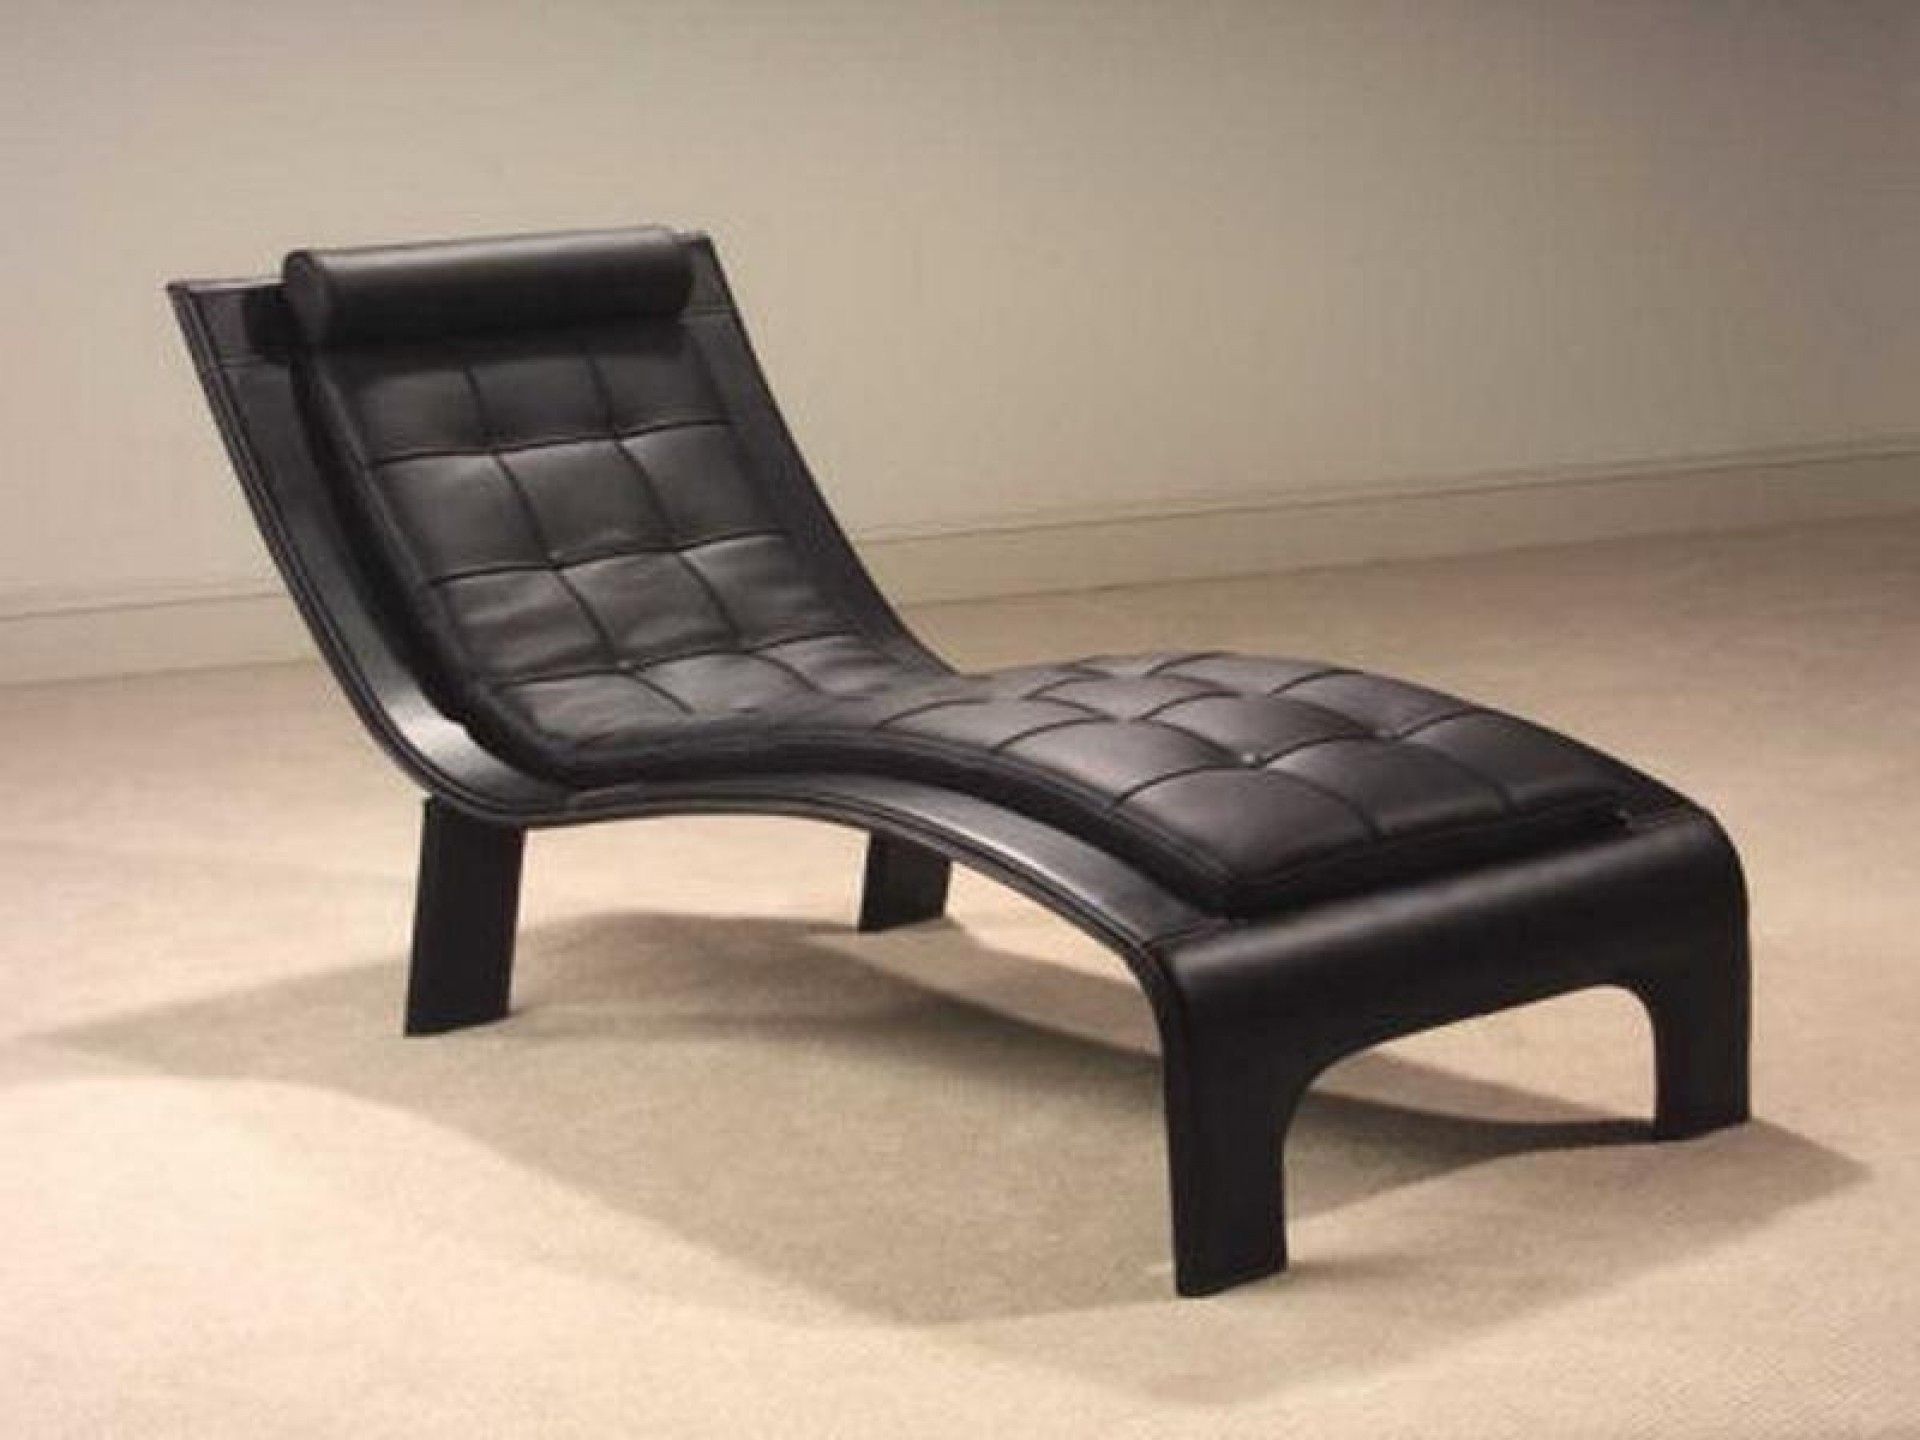 Black Leather Chaise Lounge Chairs • Lounge Chairs Ideas Inside Famous Black Leather Chaise Lounges (View 13 of 15)